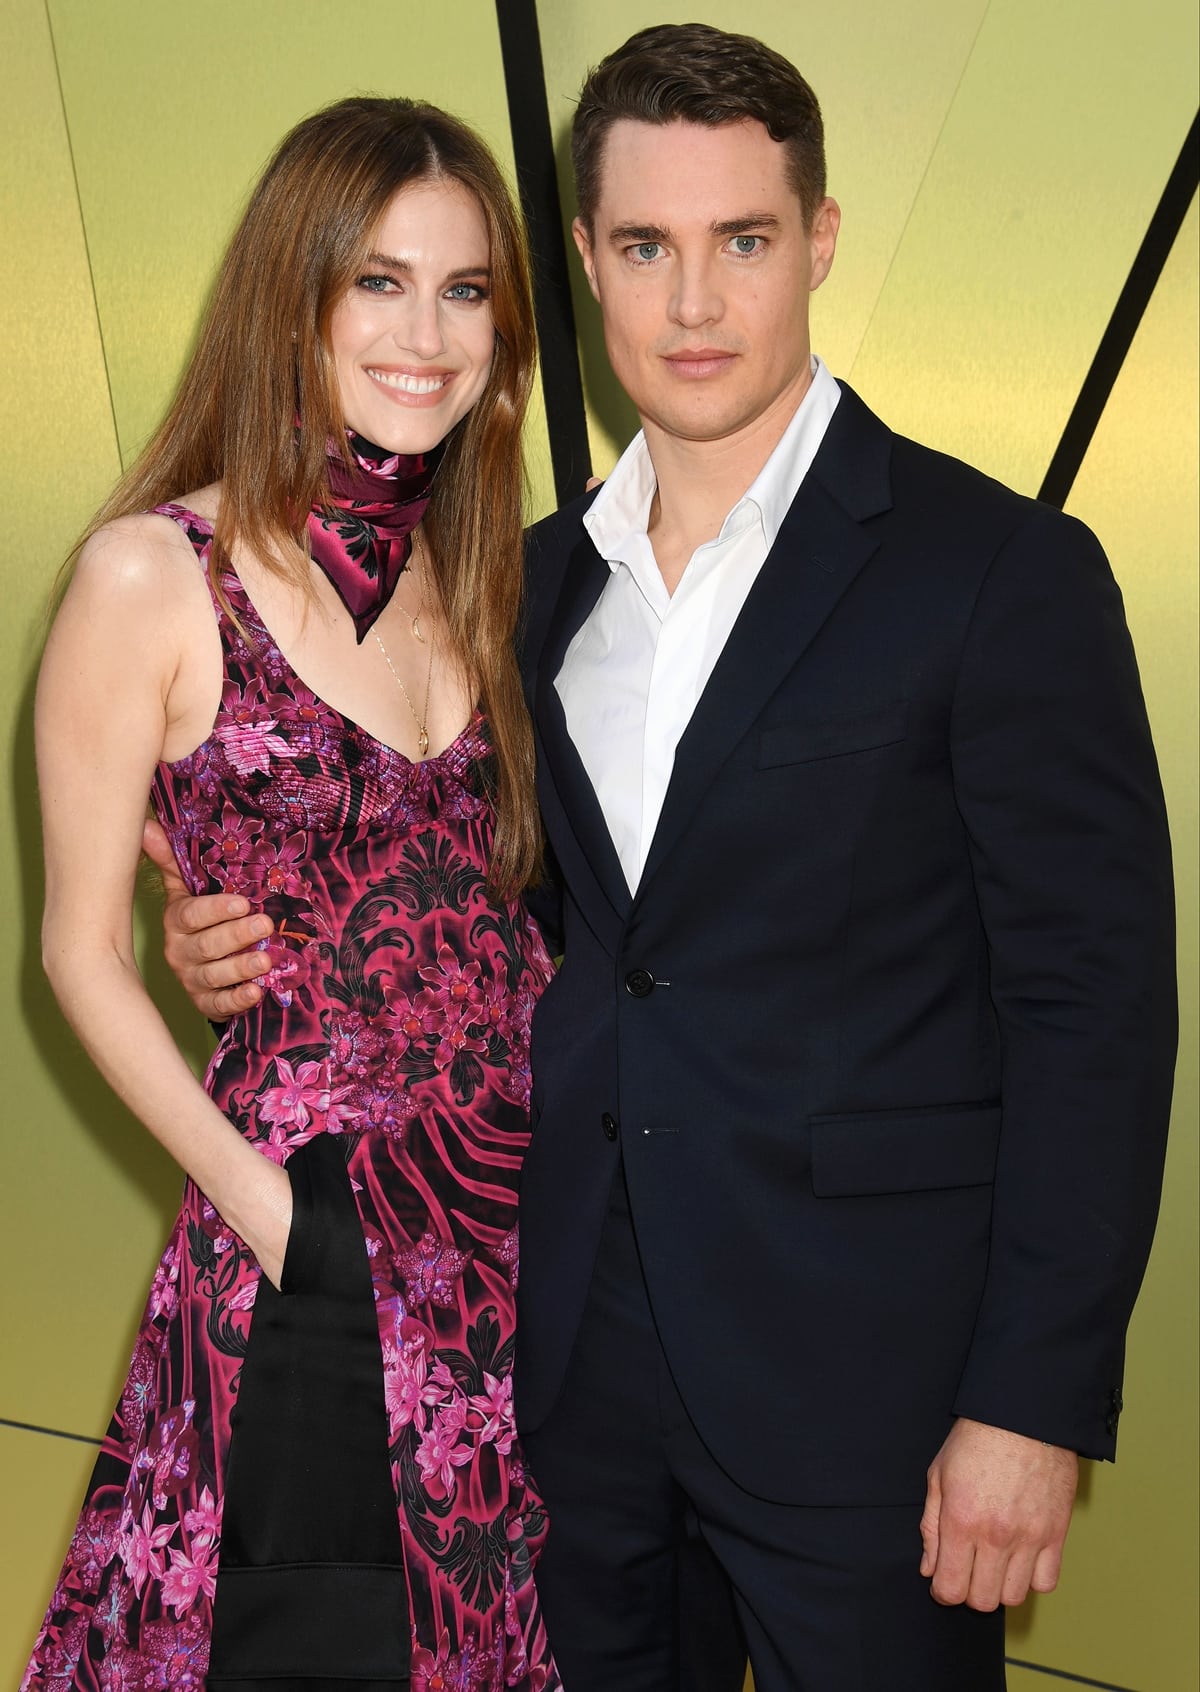 Alexander Dreymon has a height of 5ft 9 inches (175.3 cm), whereas Allison Williams is slightly shorter at 5ft 5 ½ inches (166.4 cm)